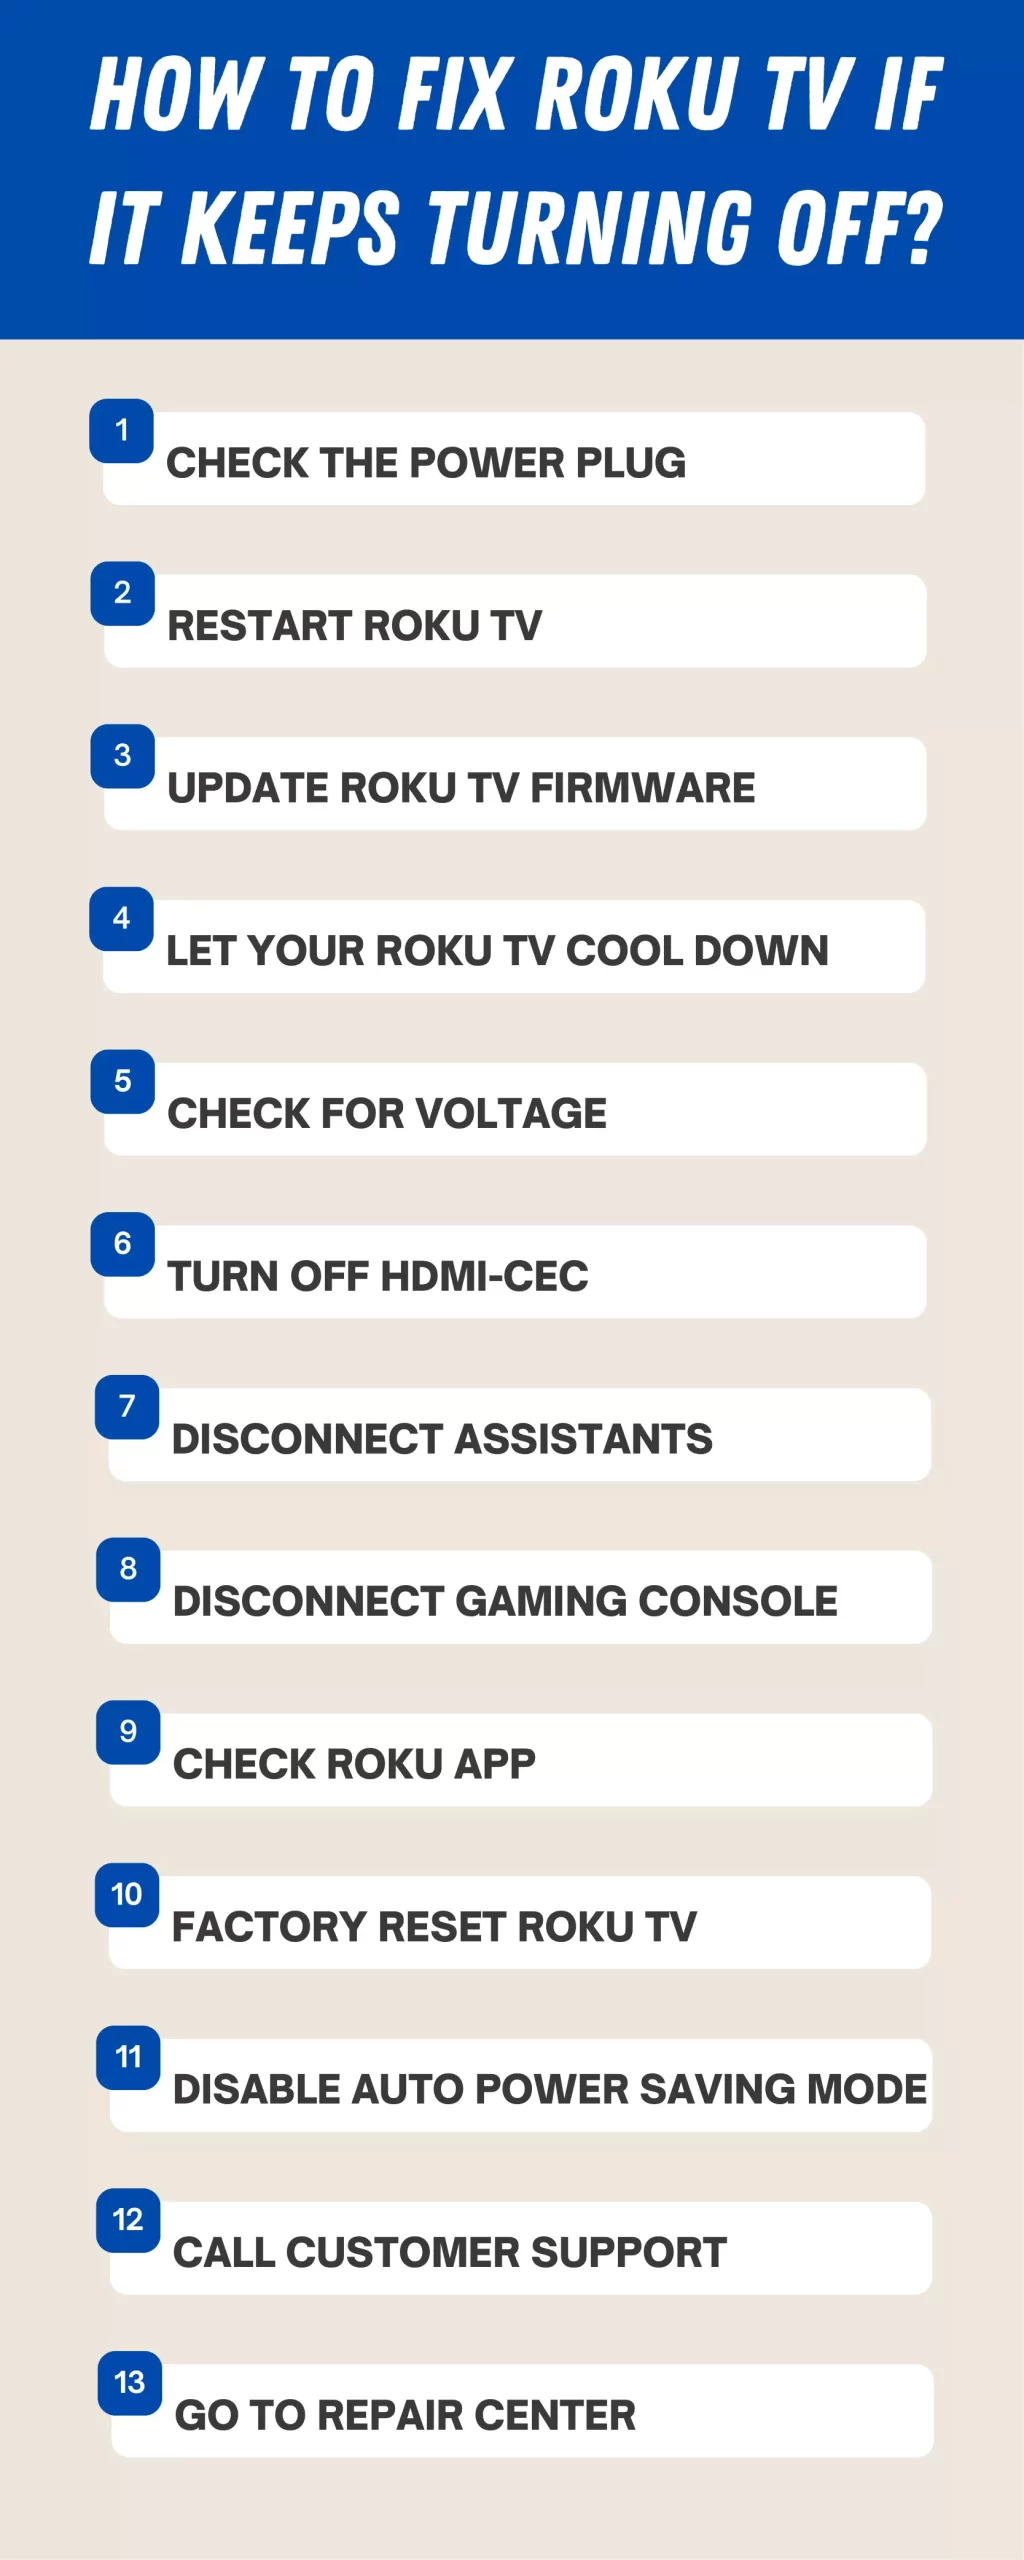 Infographic of How to Fix Roku TV if it Keeps Turning Off